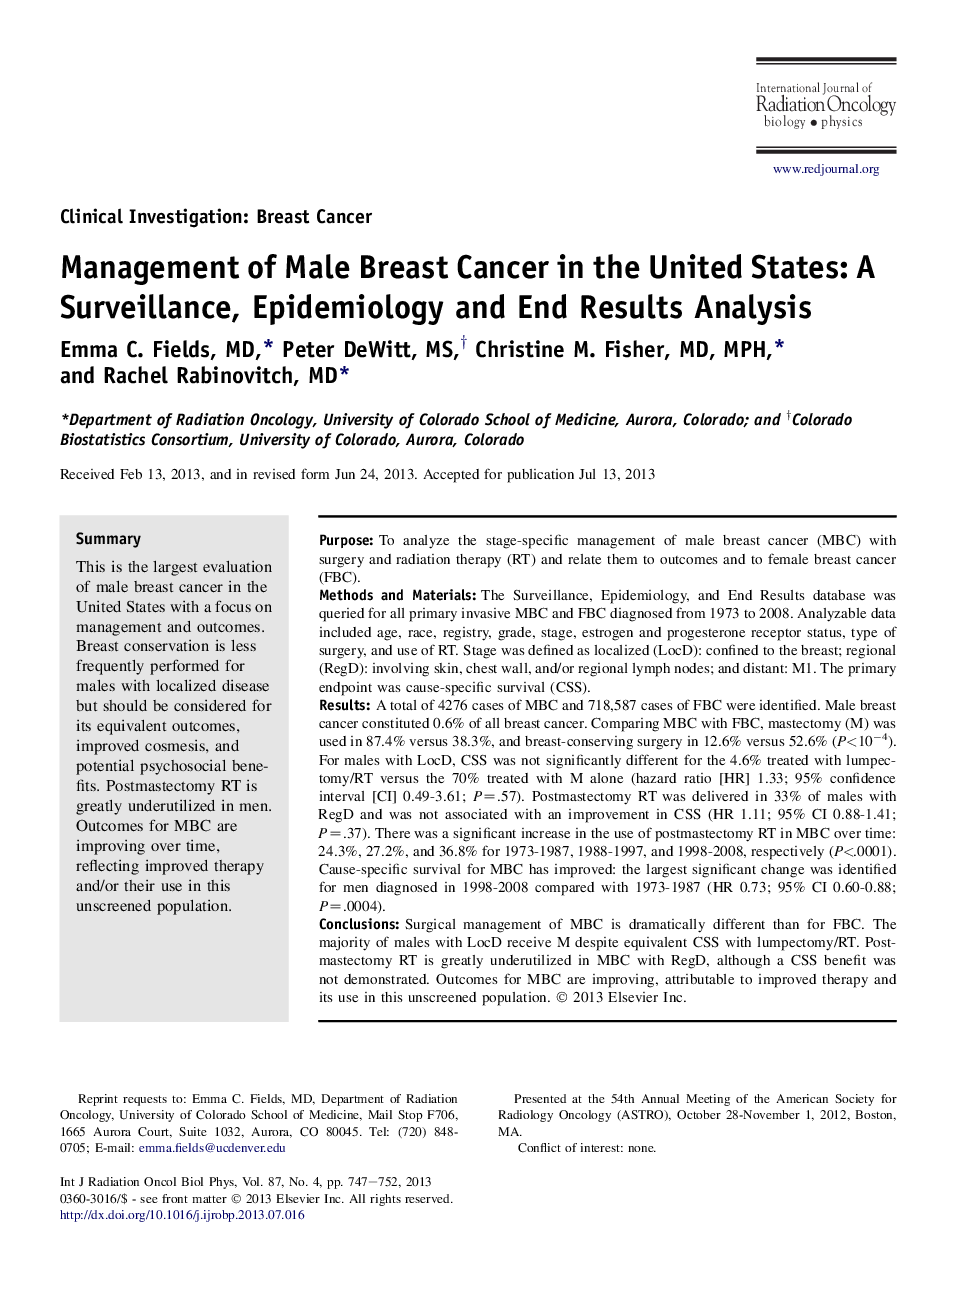 Management of Male Breast Cancer in the United States: A Surveillance, Epidemiology and End Results Analysis